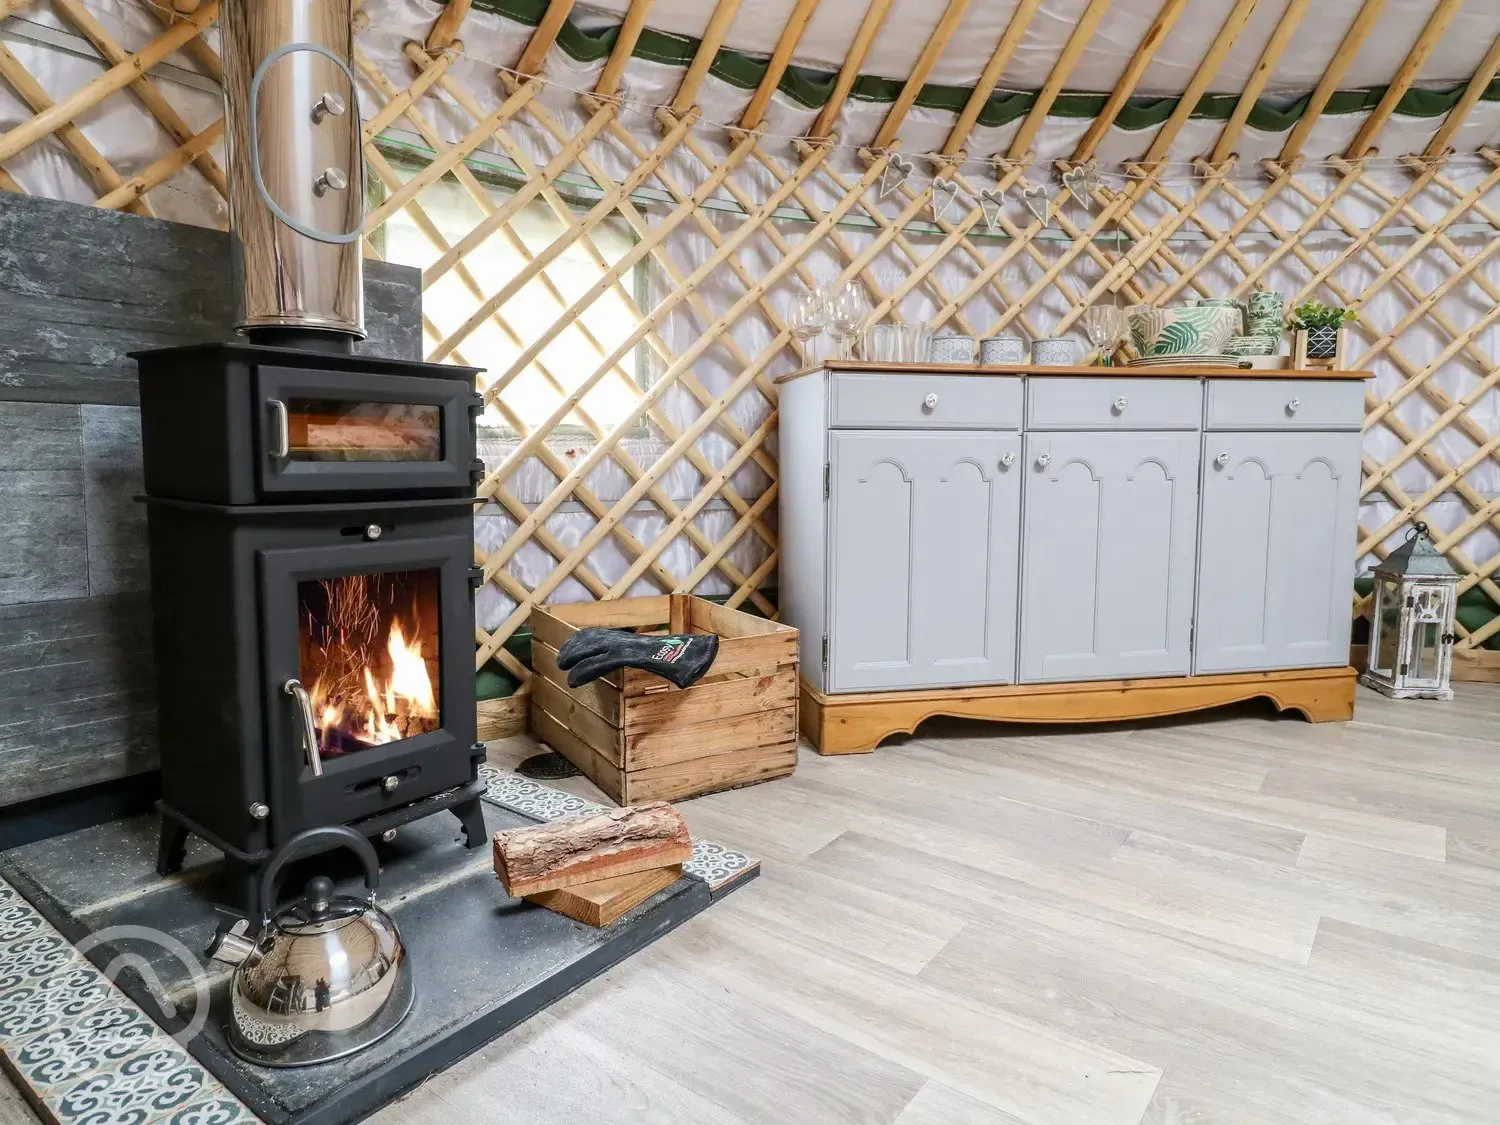 Silver Birch yurt with hot tub stove